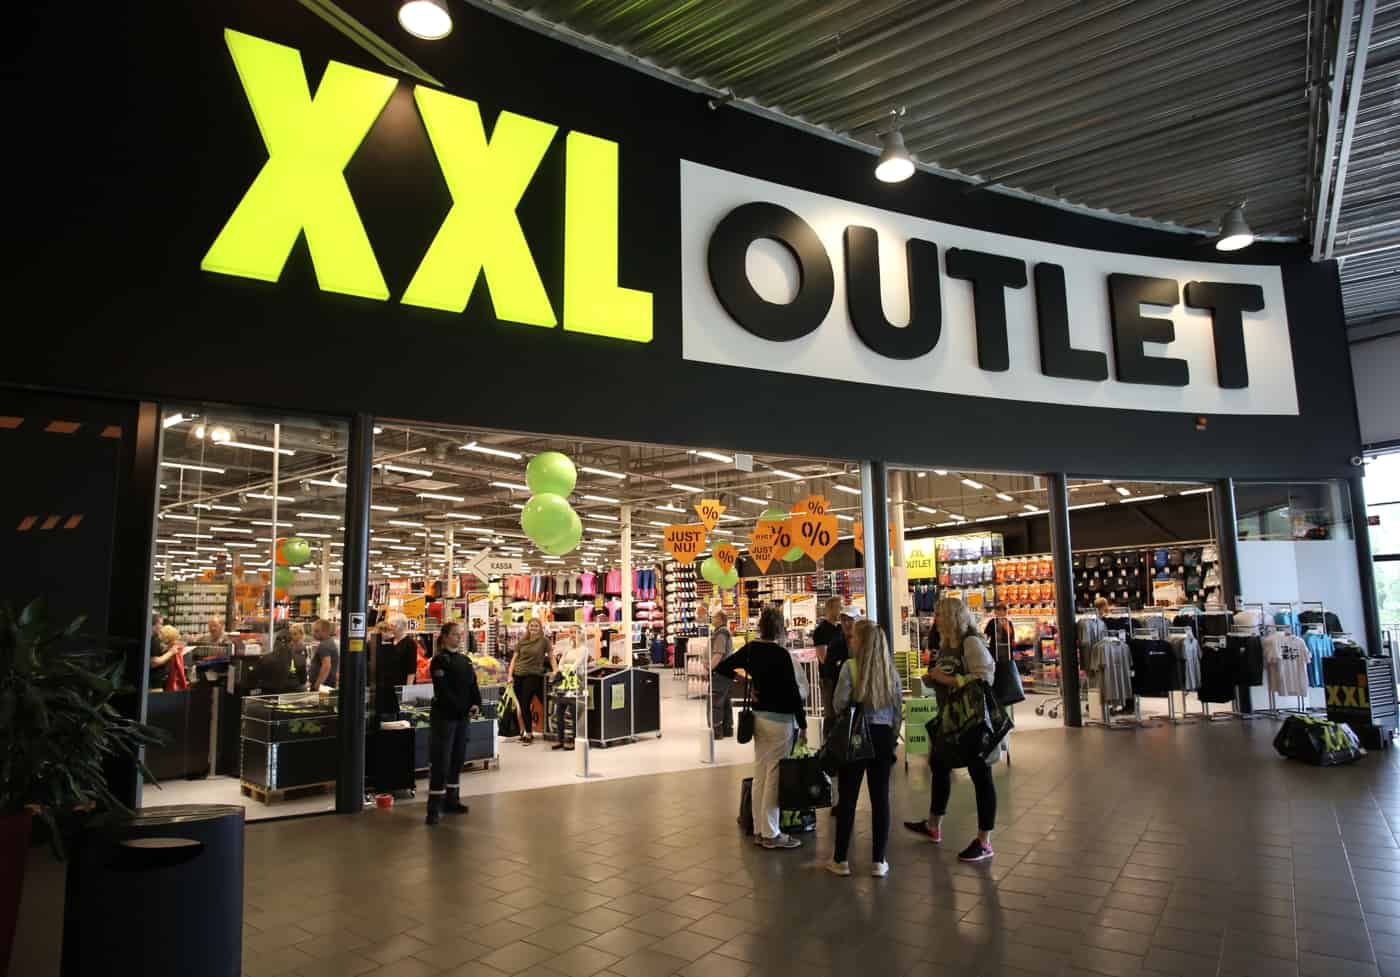 XXL Outlet